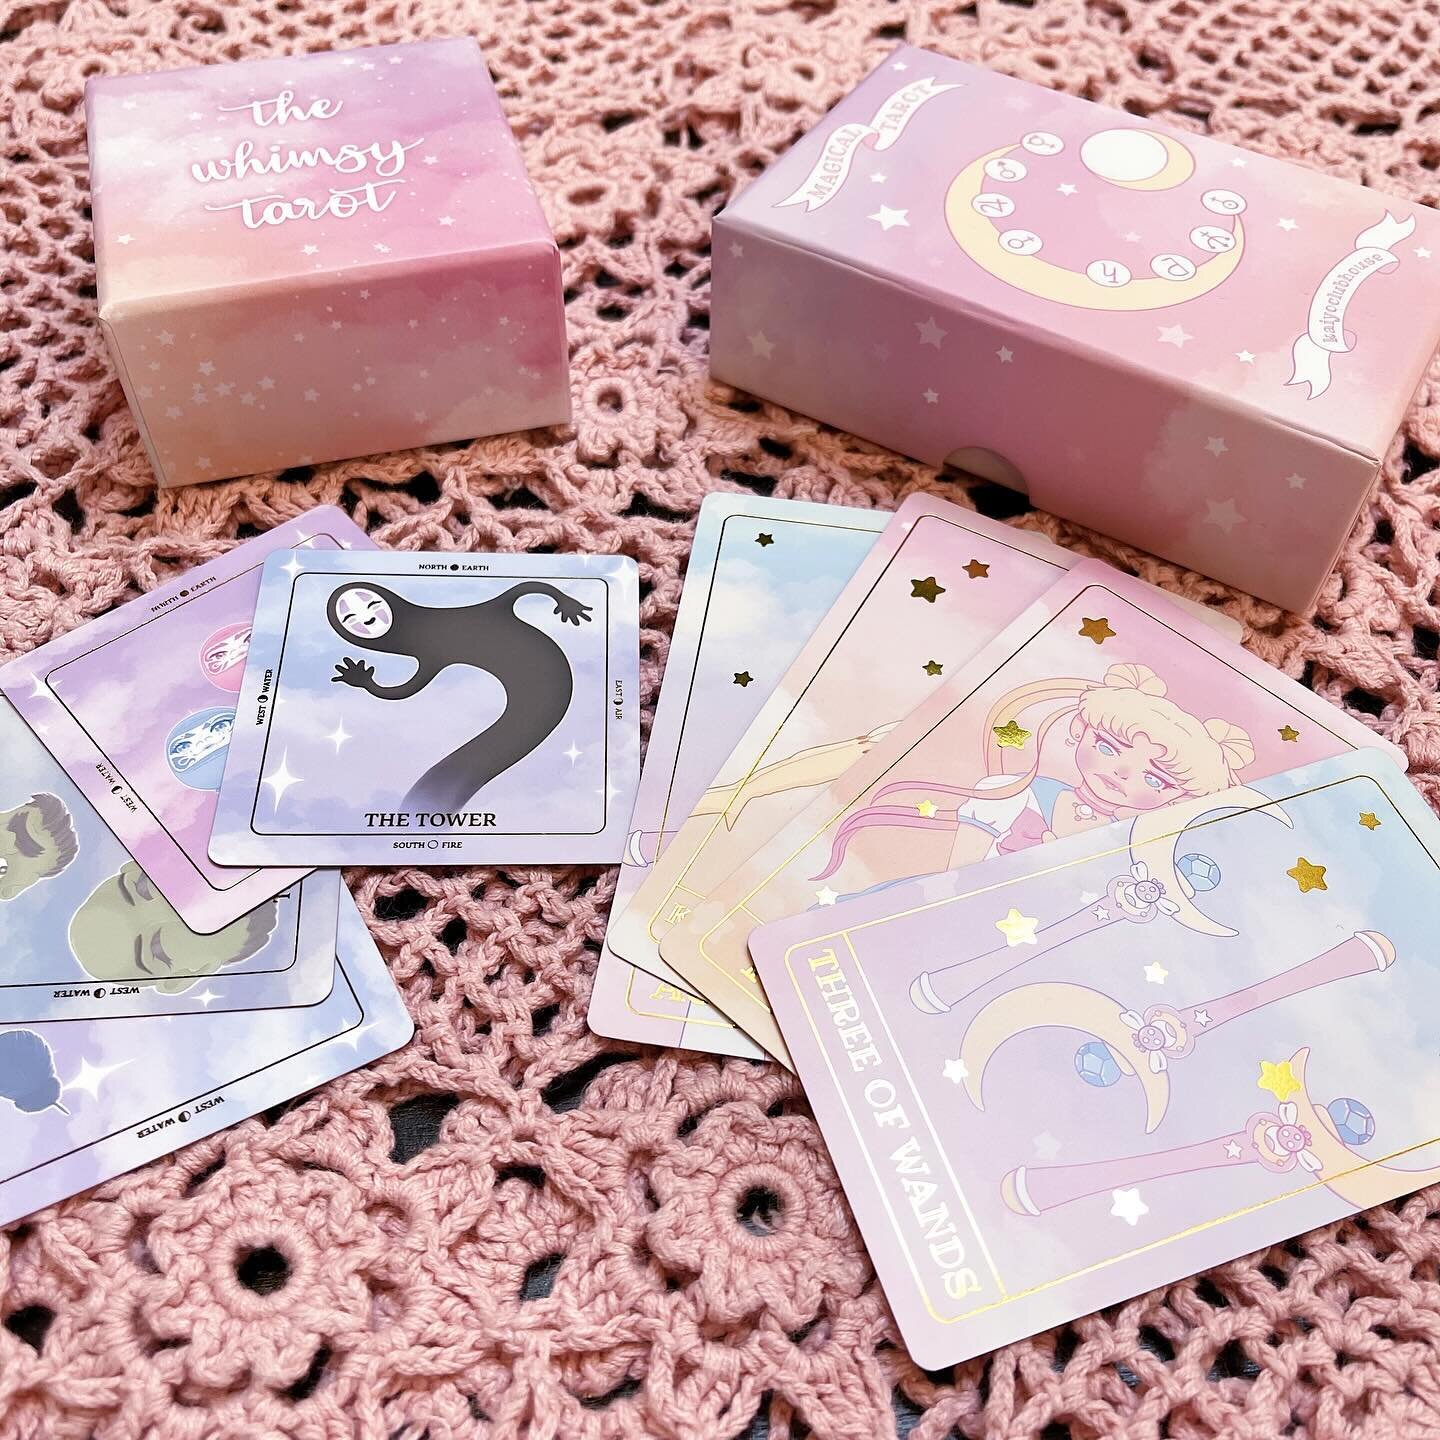 Is love on the cards this V-Day? 👀✨💖

Treat yourself or your S/O to one of these delightful tarot decks by our friend @kaiyoclubhouse - now in store! 🎉 

(Psst, we also have gorgeous enamel pins too 🛼)

#pocketclothing #supportlocalmakers #tarotd